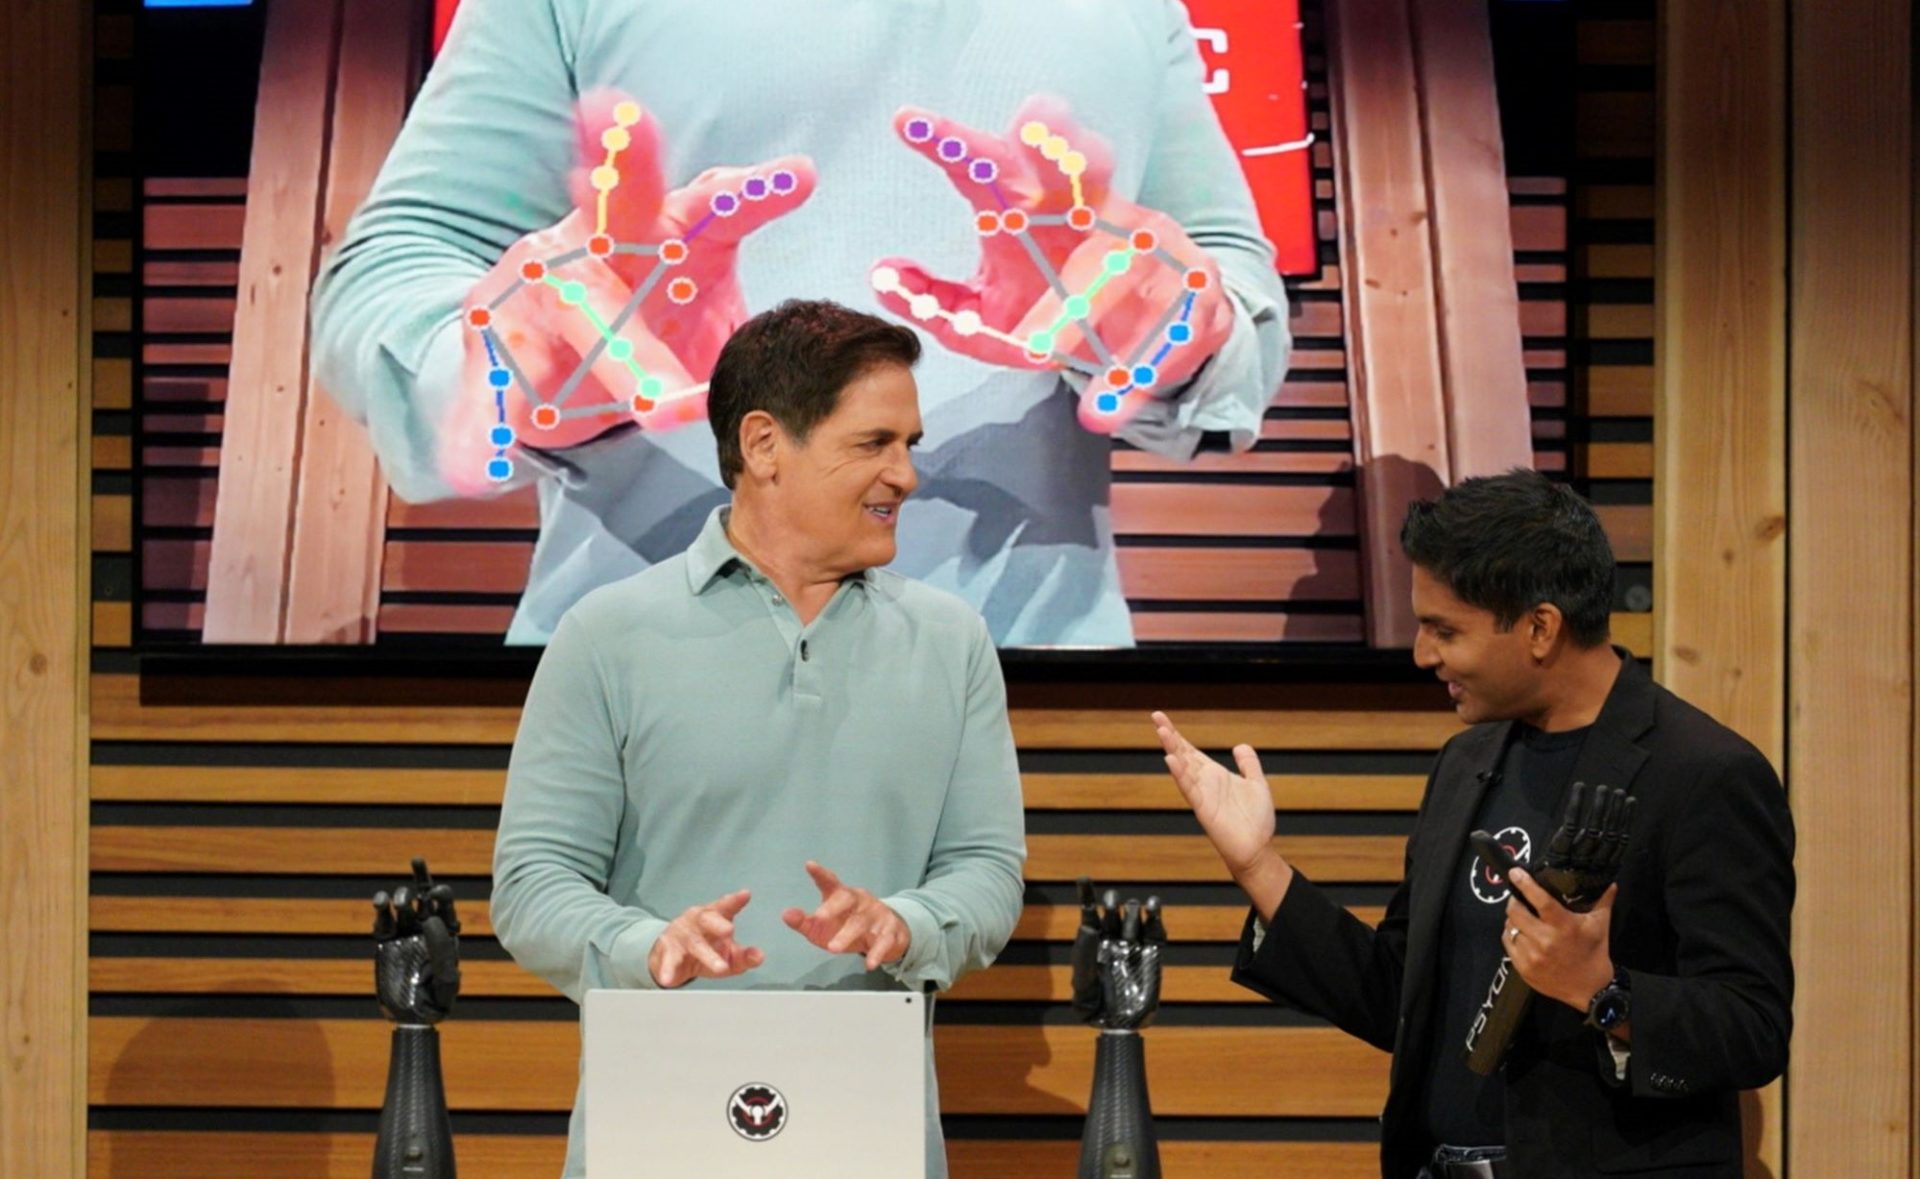 Shark Tank's Mark Cuban is standing behind a desk displaying two bionic hands, while Aadeel Akhtar stands nearby with his hands out.